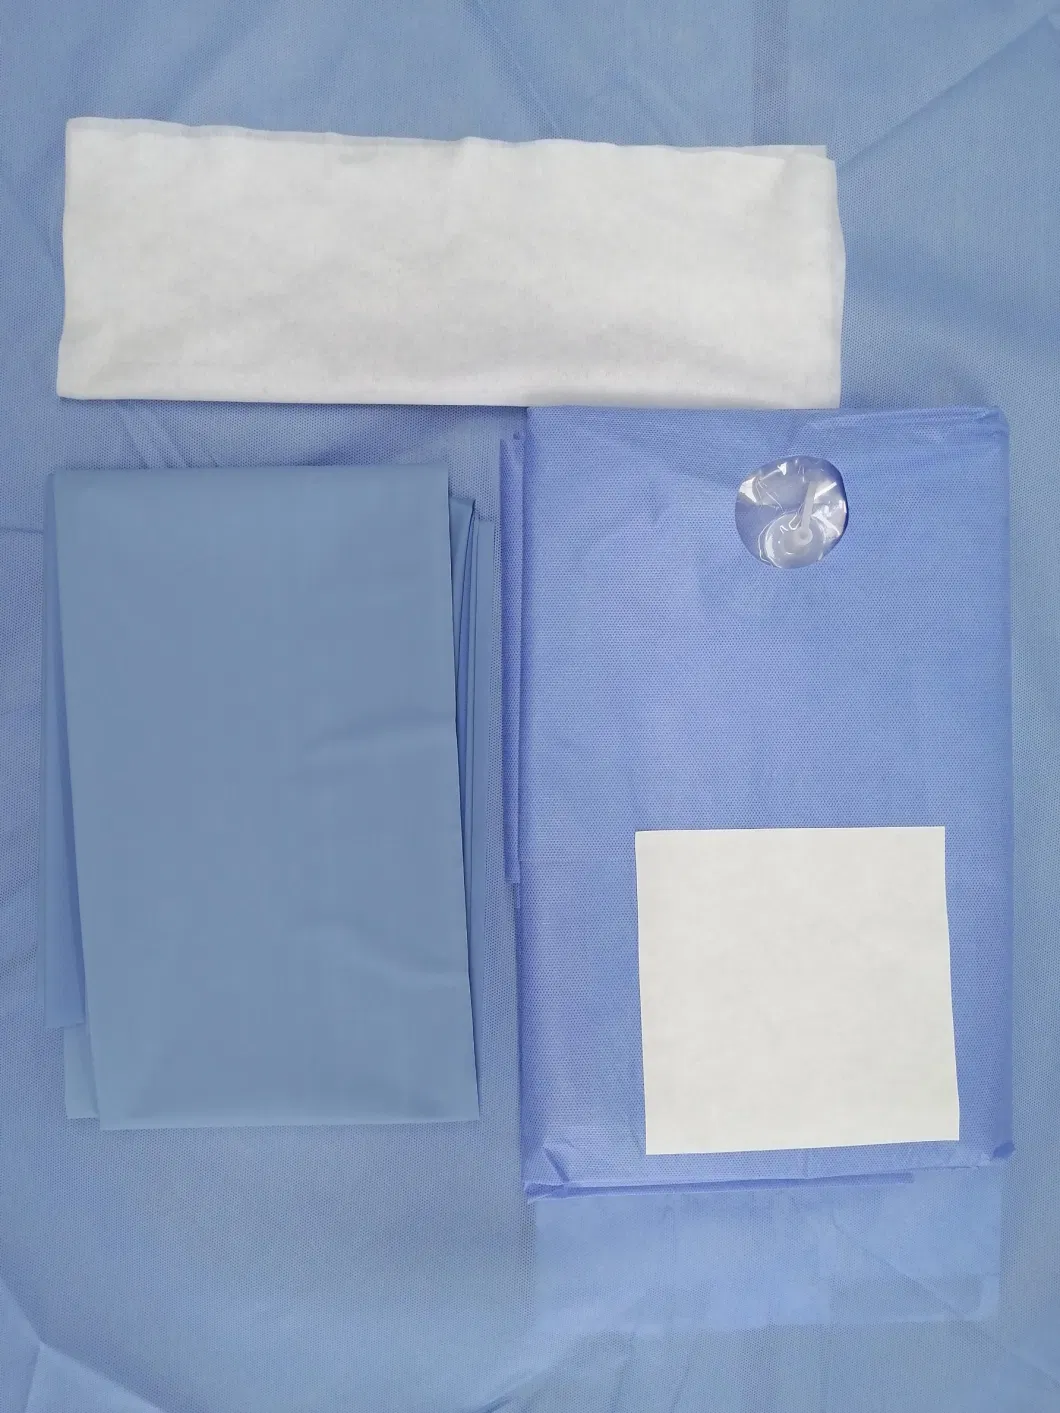 Surgical Tur Drape Kits with Urology Collection Pouch